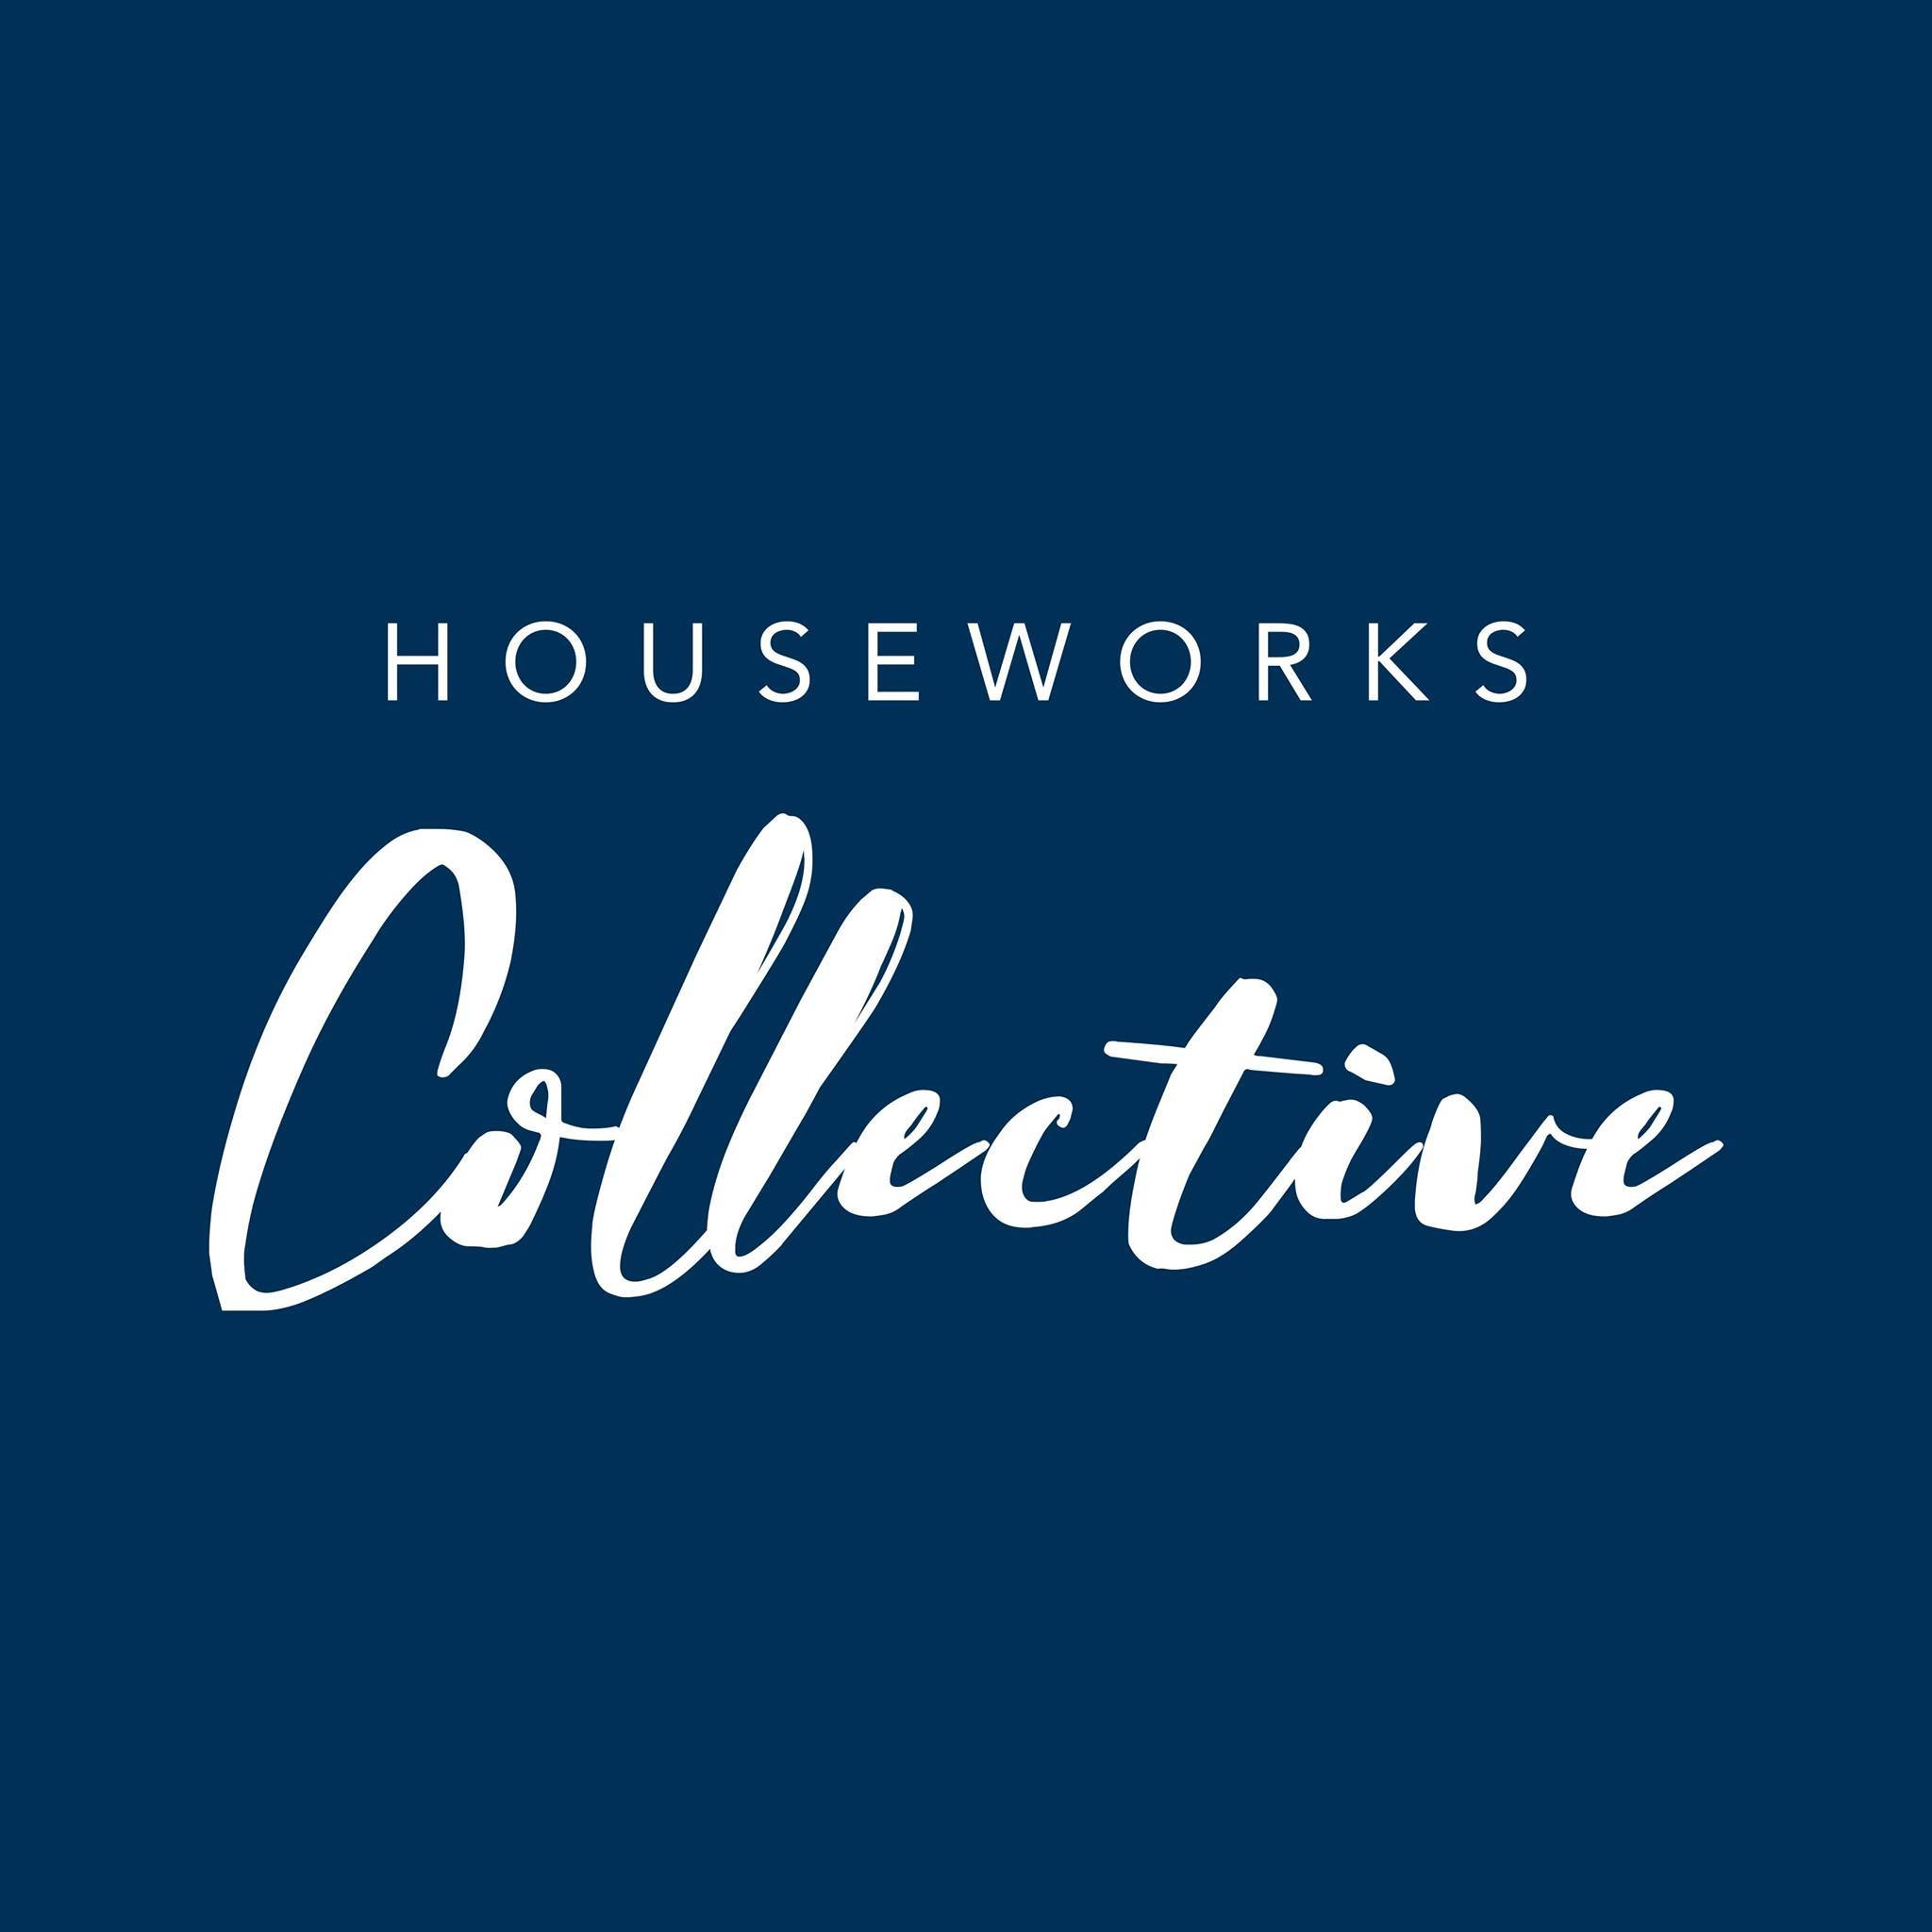 Houseworks Collective Expands Its Presence in Milwaukee – New Headquarters in Walker’s Point